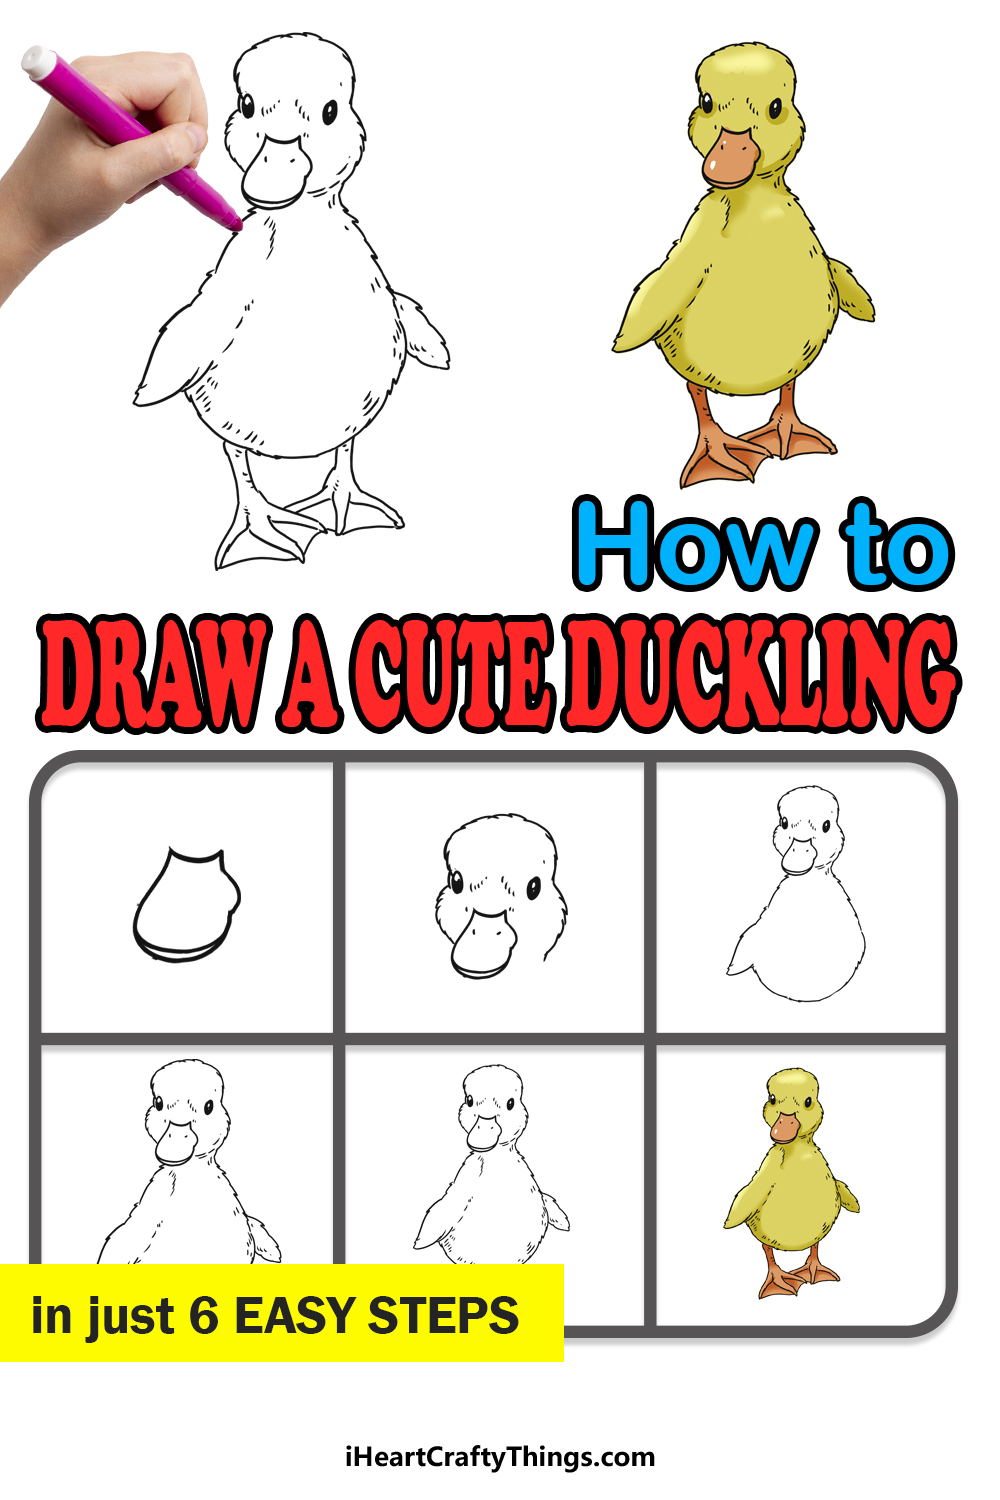 How to Draw A Cute Duckling step by step guide